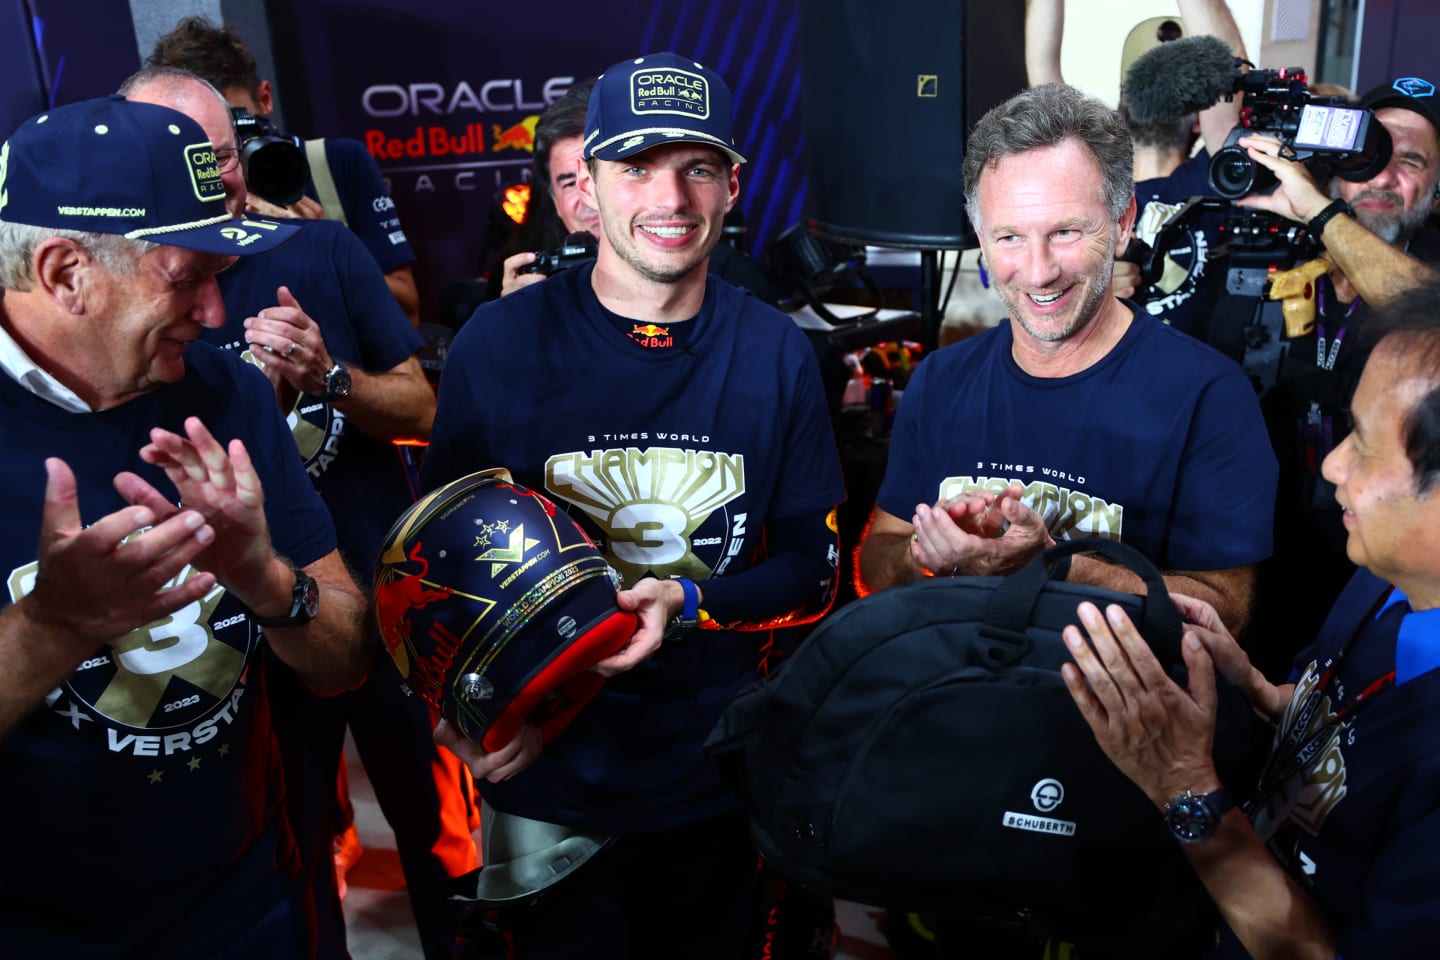 LUSAIL CITY, QATAR - OCTOBER 07: 2023 F1 World Drivers Champion Max Verstappen of the Netherlands and Oracle Red Bull Racing is congratulted by Red Bull Racing Team Principal Christian Horner , Chalerm Yoovidhya and Red Bull Racing Team Consultant Dr Helmut Marko as he is presented with a celebratory helmet after the sprint race ahead of the F1 Grand Prix of Qatar at Lusail International Circuit on October 07, 2023 in Lusail City, Qatar. (Photo by Dan Istitene - Formula 1/Formula 1 via Getty Images)